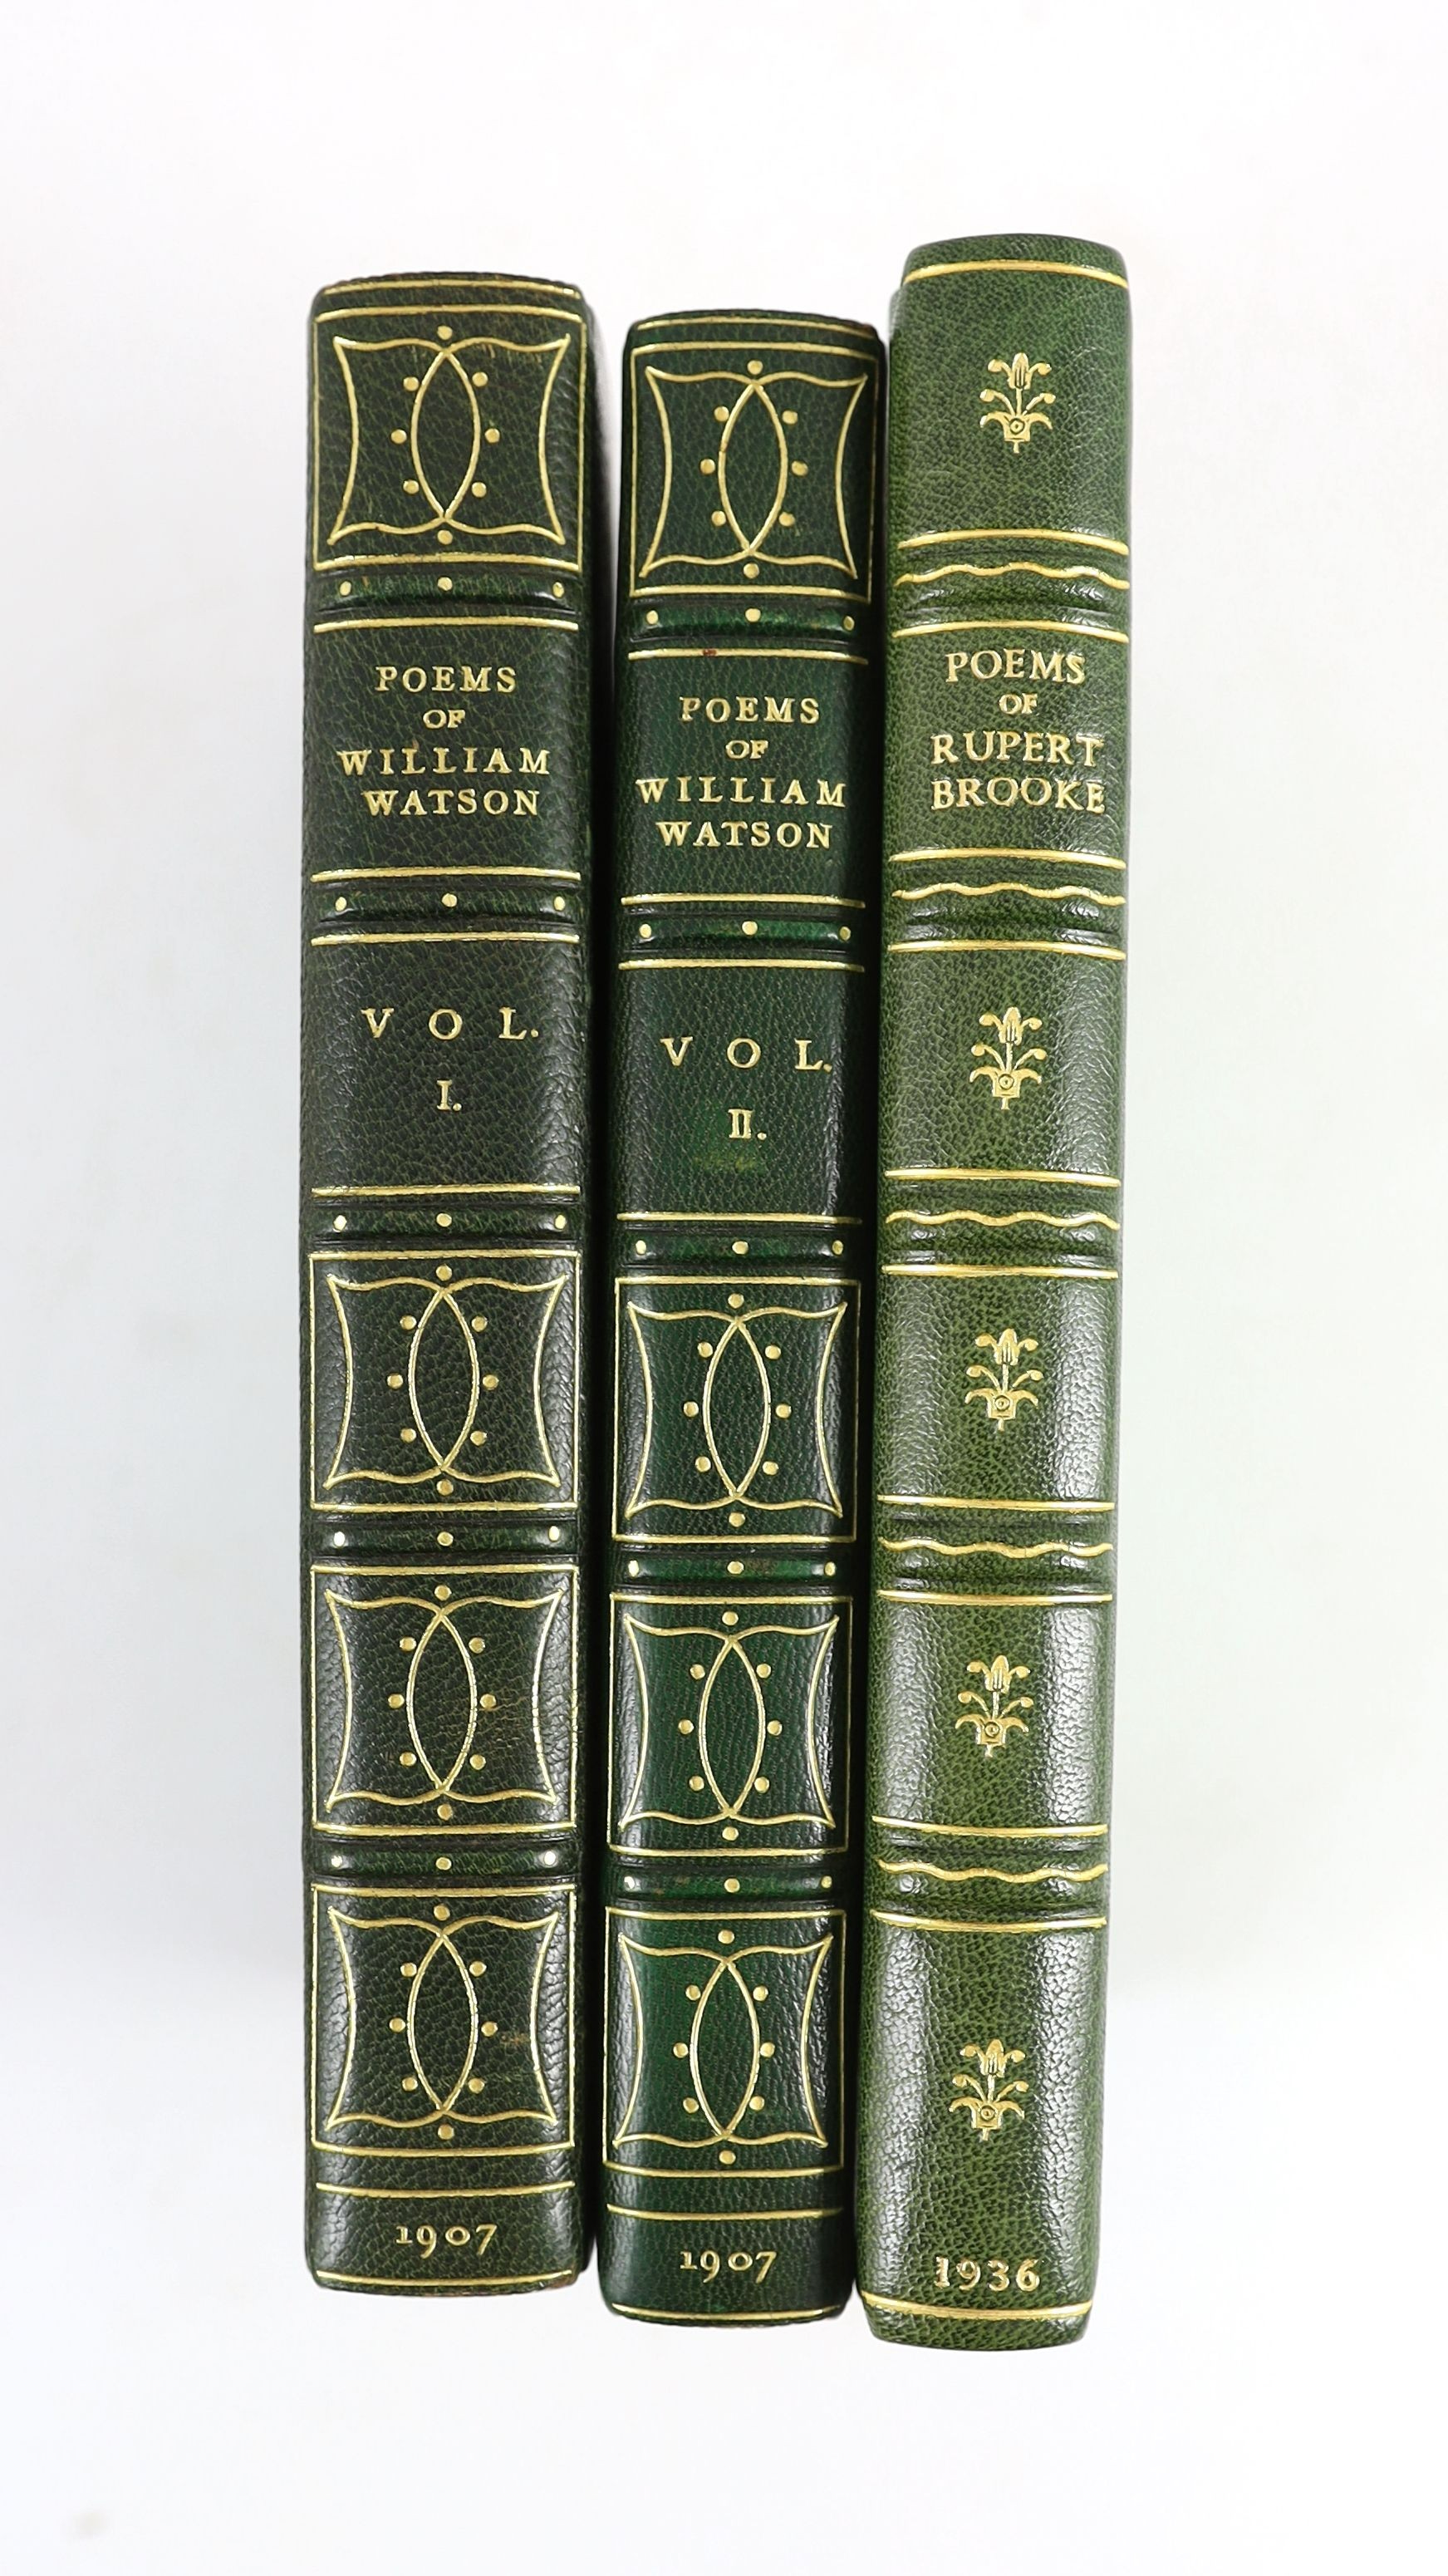 Poetry rebound in fine bindings - 6 works - Gower, George Leveson - Poems, 8vo, crushed blue morocco by Birdsall, Northampton, front board monogrammed C.L.G., William Heinemann, London, 1902; Brooke, Rupert - The Complet